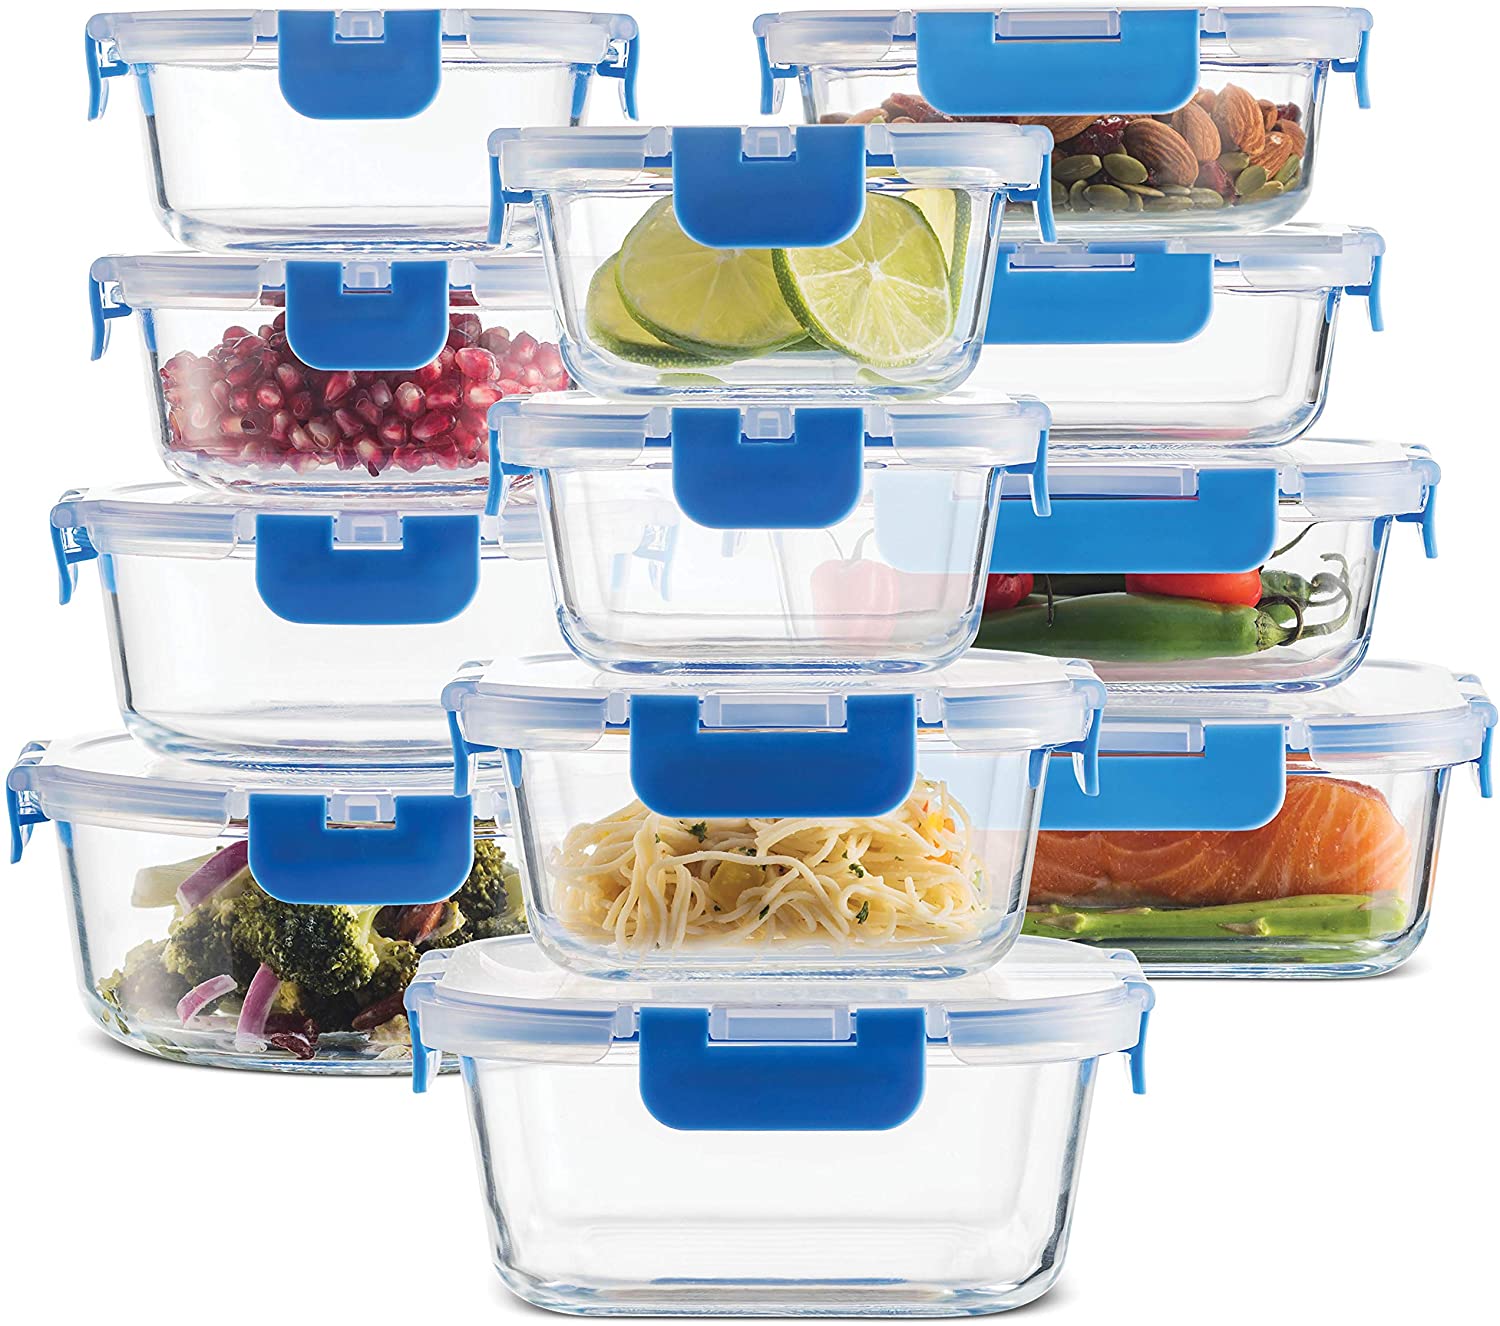 Lowest Price Ever- 24 Piece Hinged Locking Lid Glass Food Containers $26.65